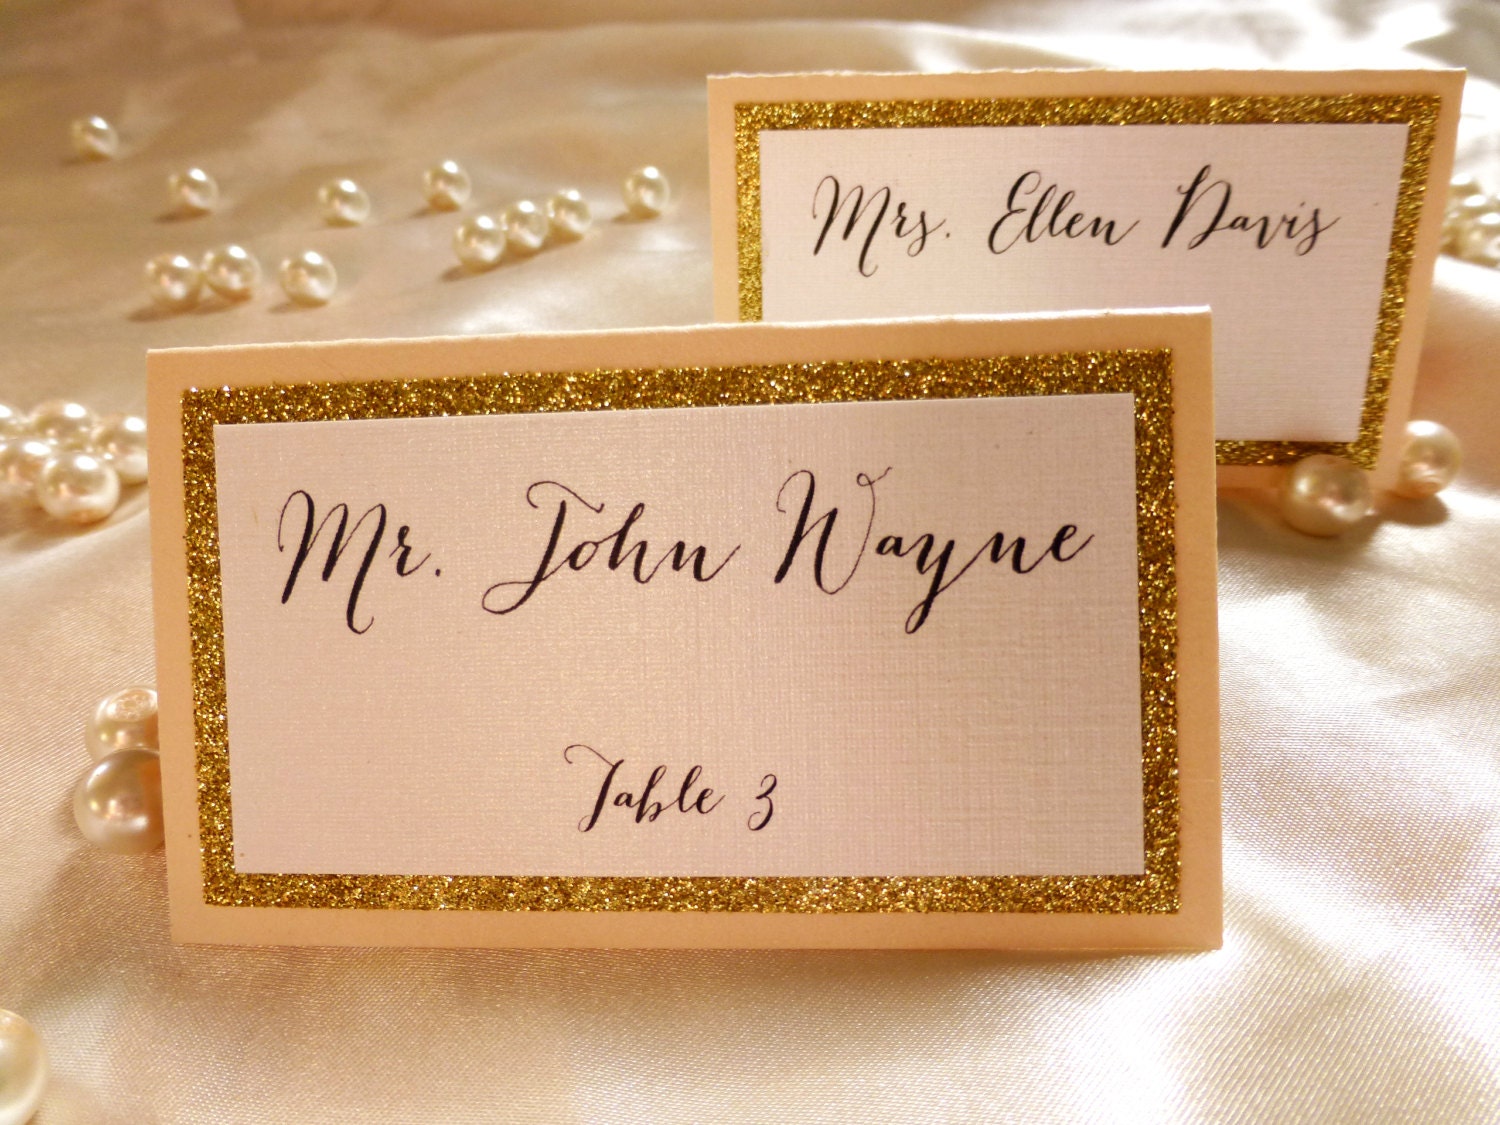 Blush and Gold place cards